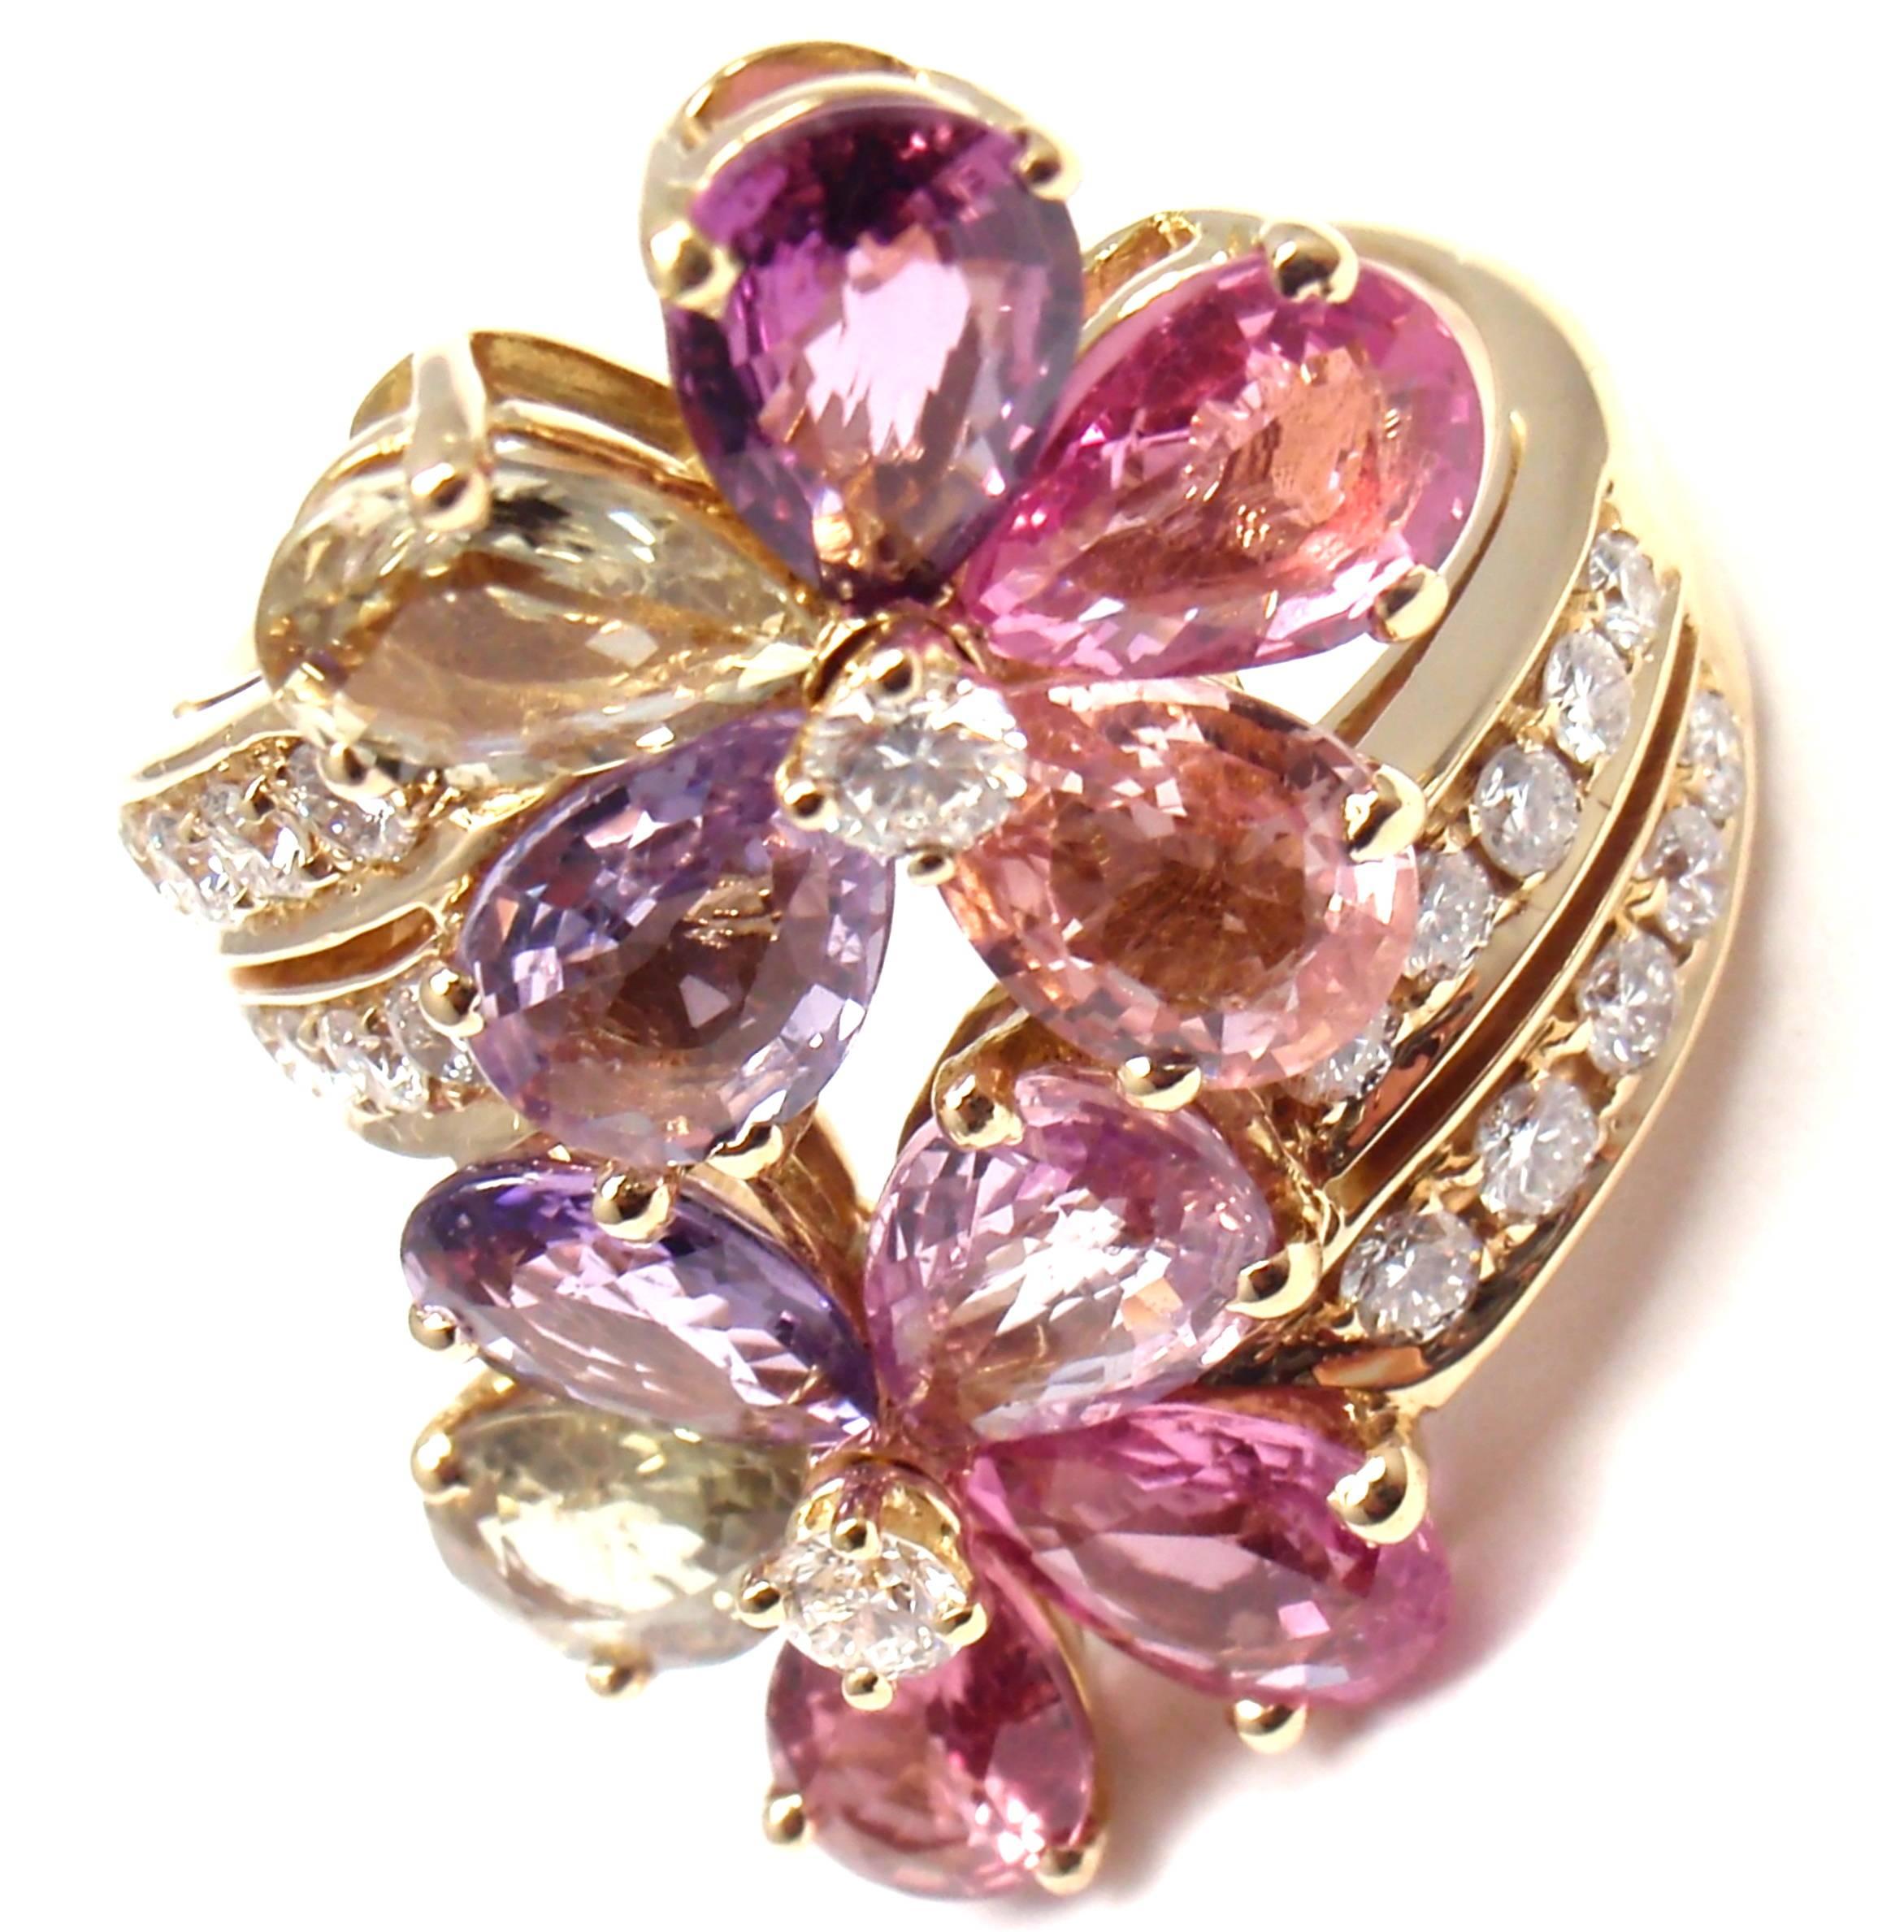 18k Yellow Gold Fancy Color Sapphire Flower Ring By Bulgari.
With 22 round brilliant cut diamonds VS1 clarity, E color total weight approx. .80ct
10 peat shape fancy color sapphires total weight approx. 9ct
This ring comes with original Bulgari